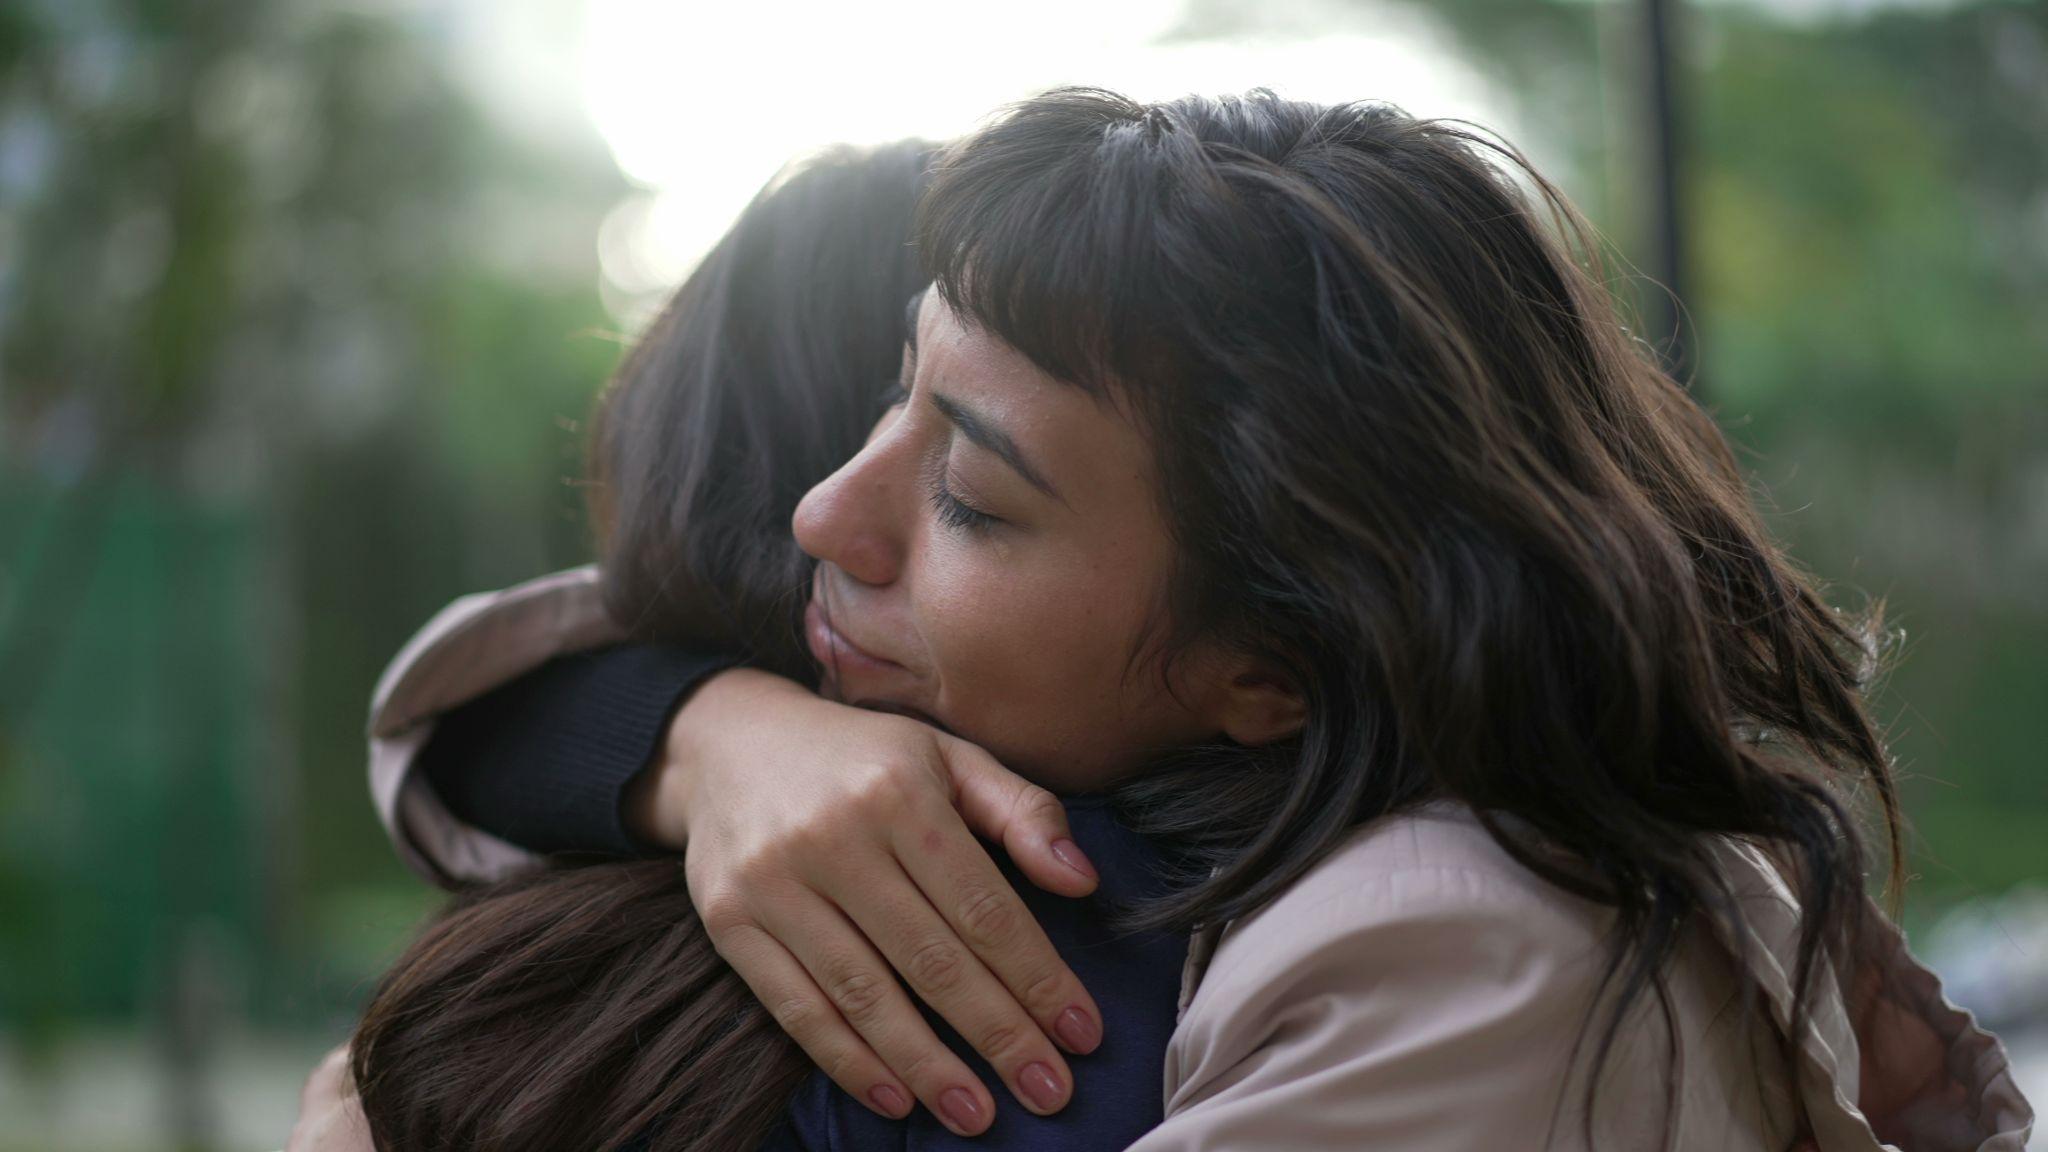 sympathetic woman hugging friend with empathy and support.